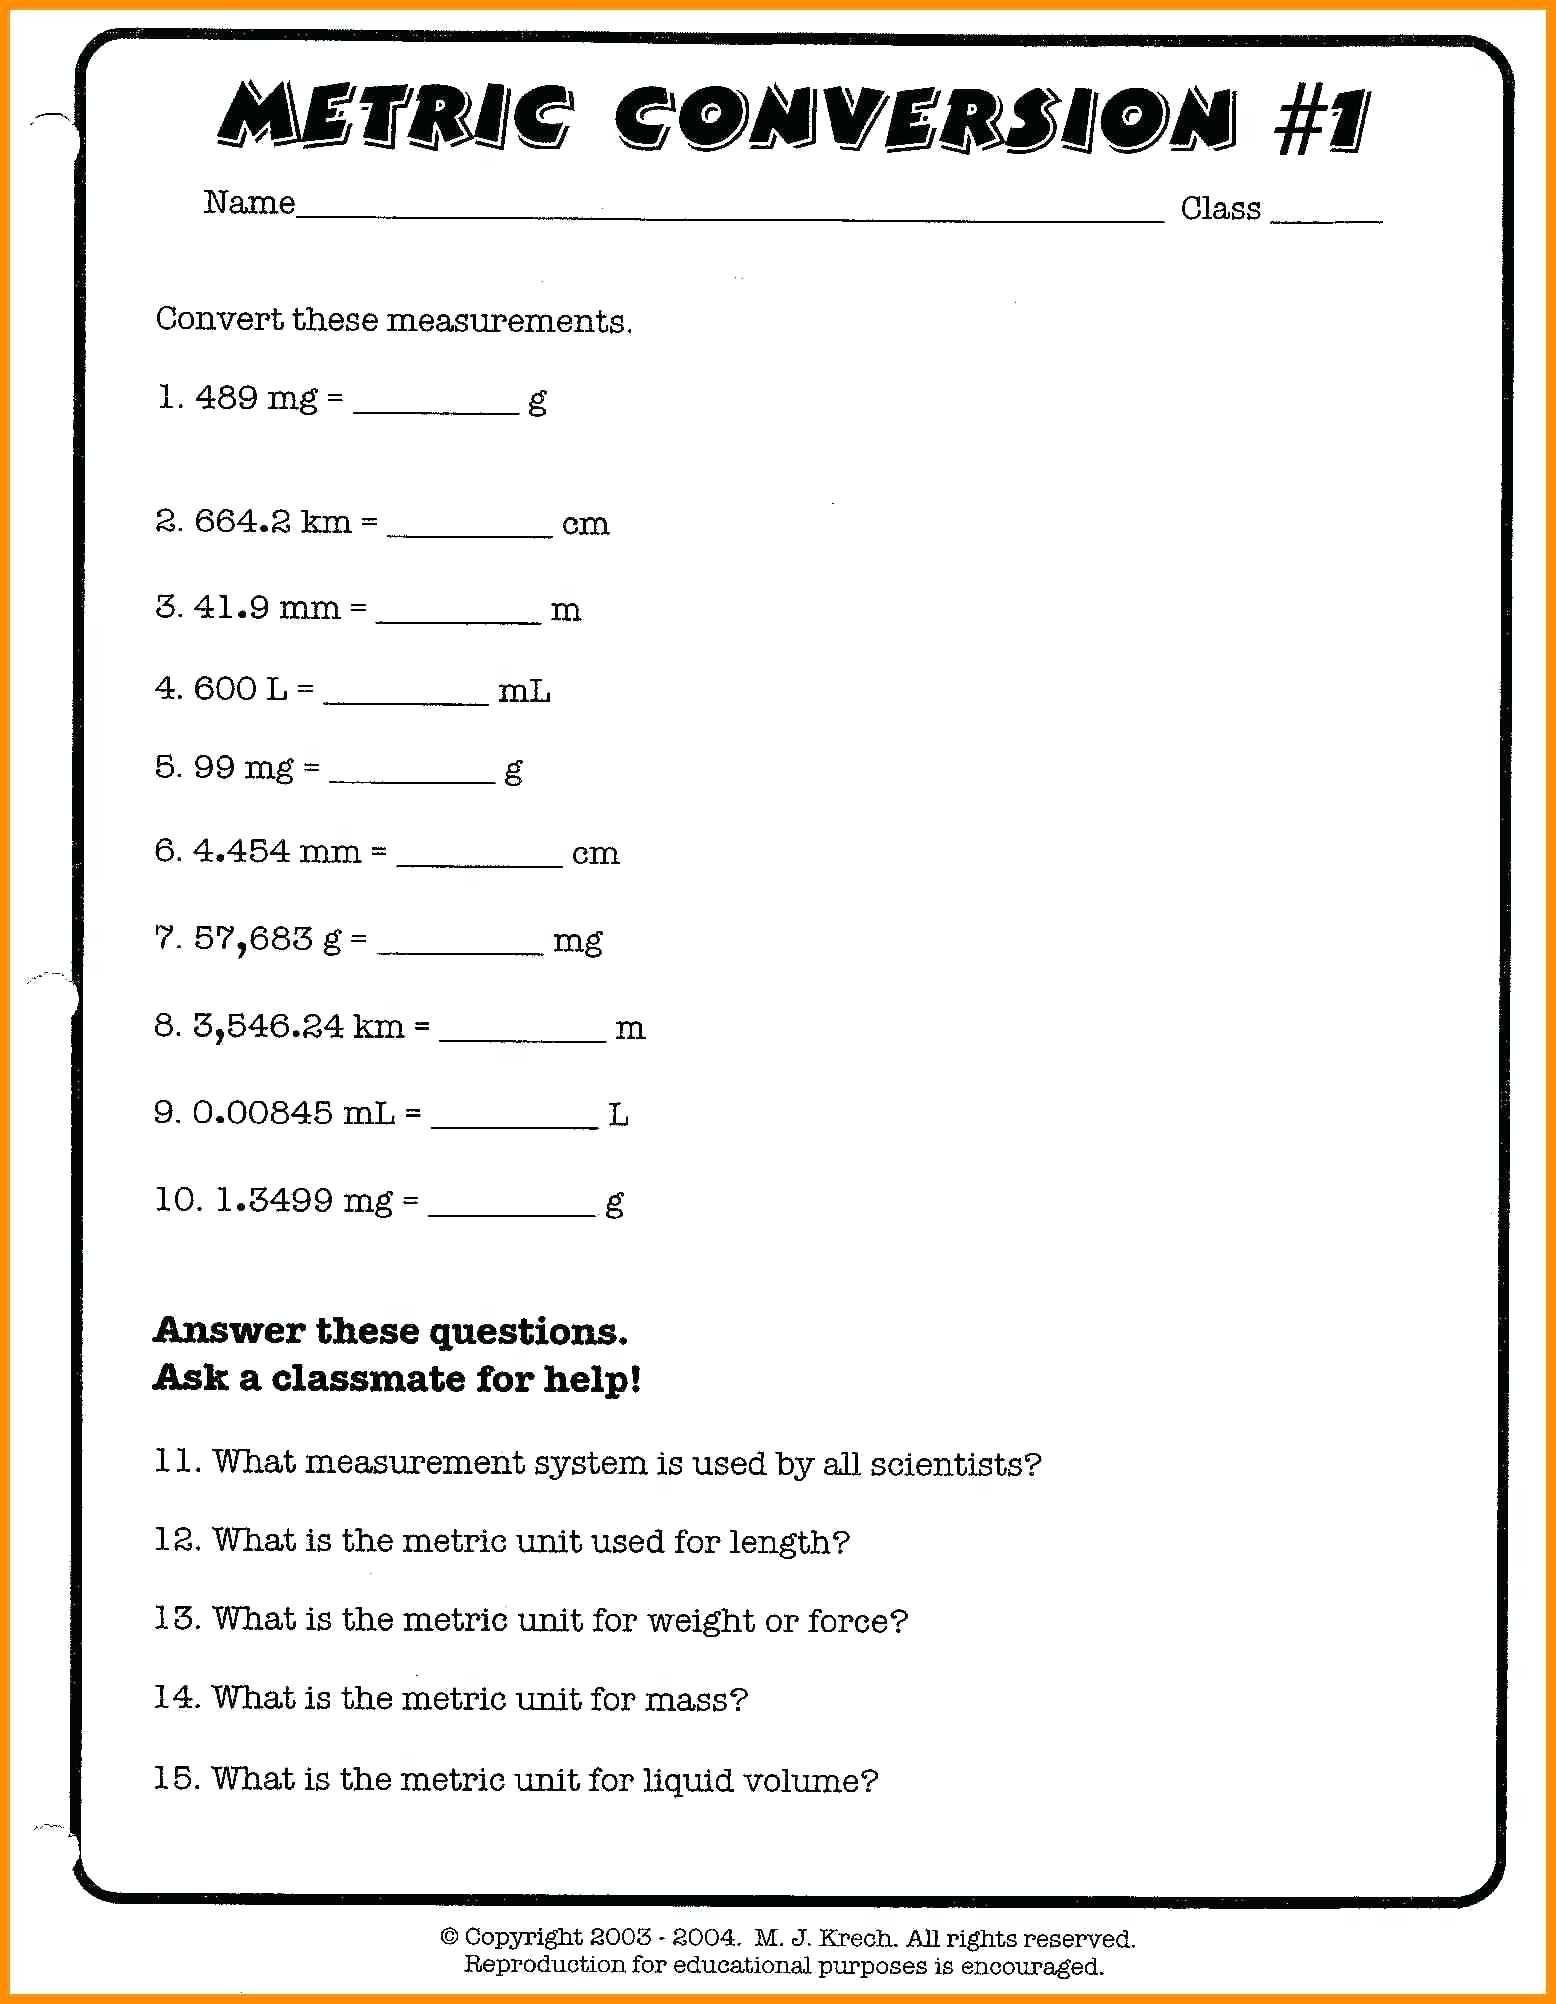 Mass Weight and Gravity Worksheet Answers Along with Mass and Weight Worksheet Answers the Best Worksheets Image